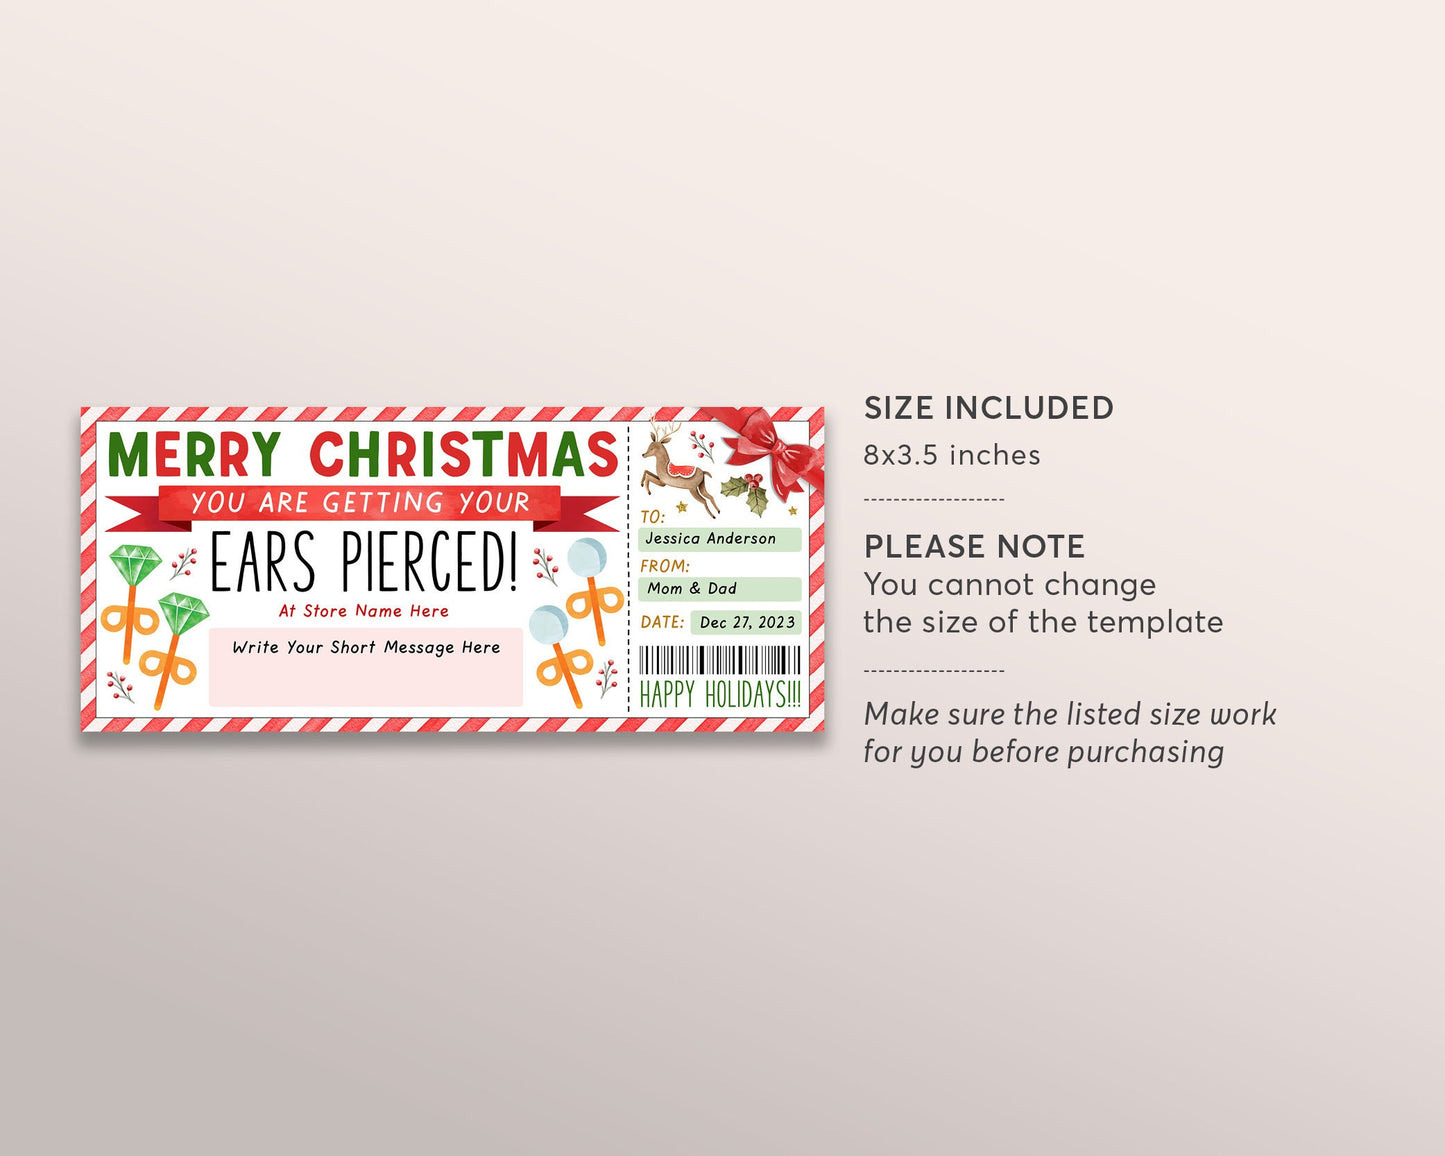 Christmas Ear Piercing Gift Voucher Editable Template, Surprise Gift Certificate For First Piercing Holiday Pierce Earring Coupon Teen Tween